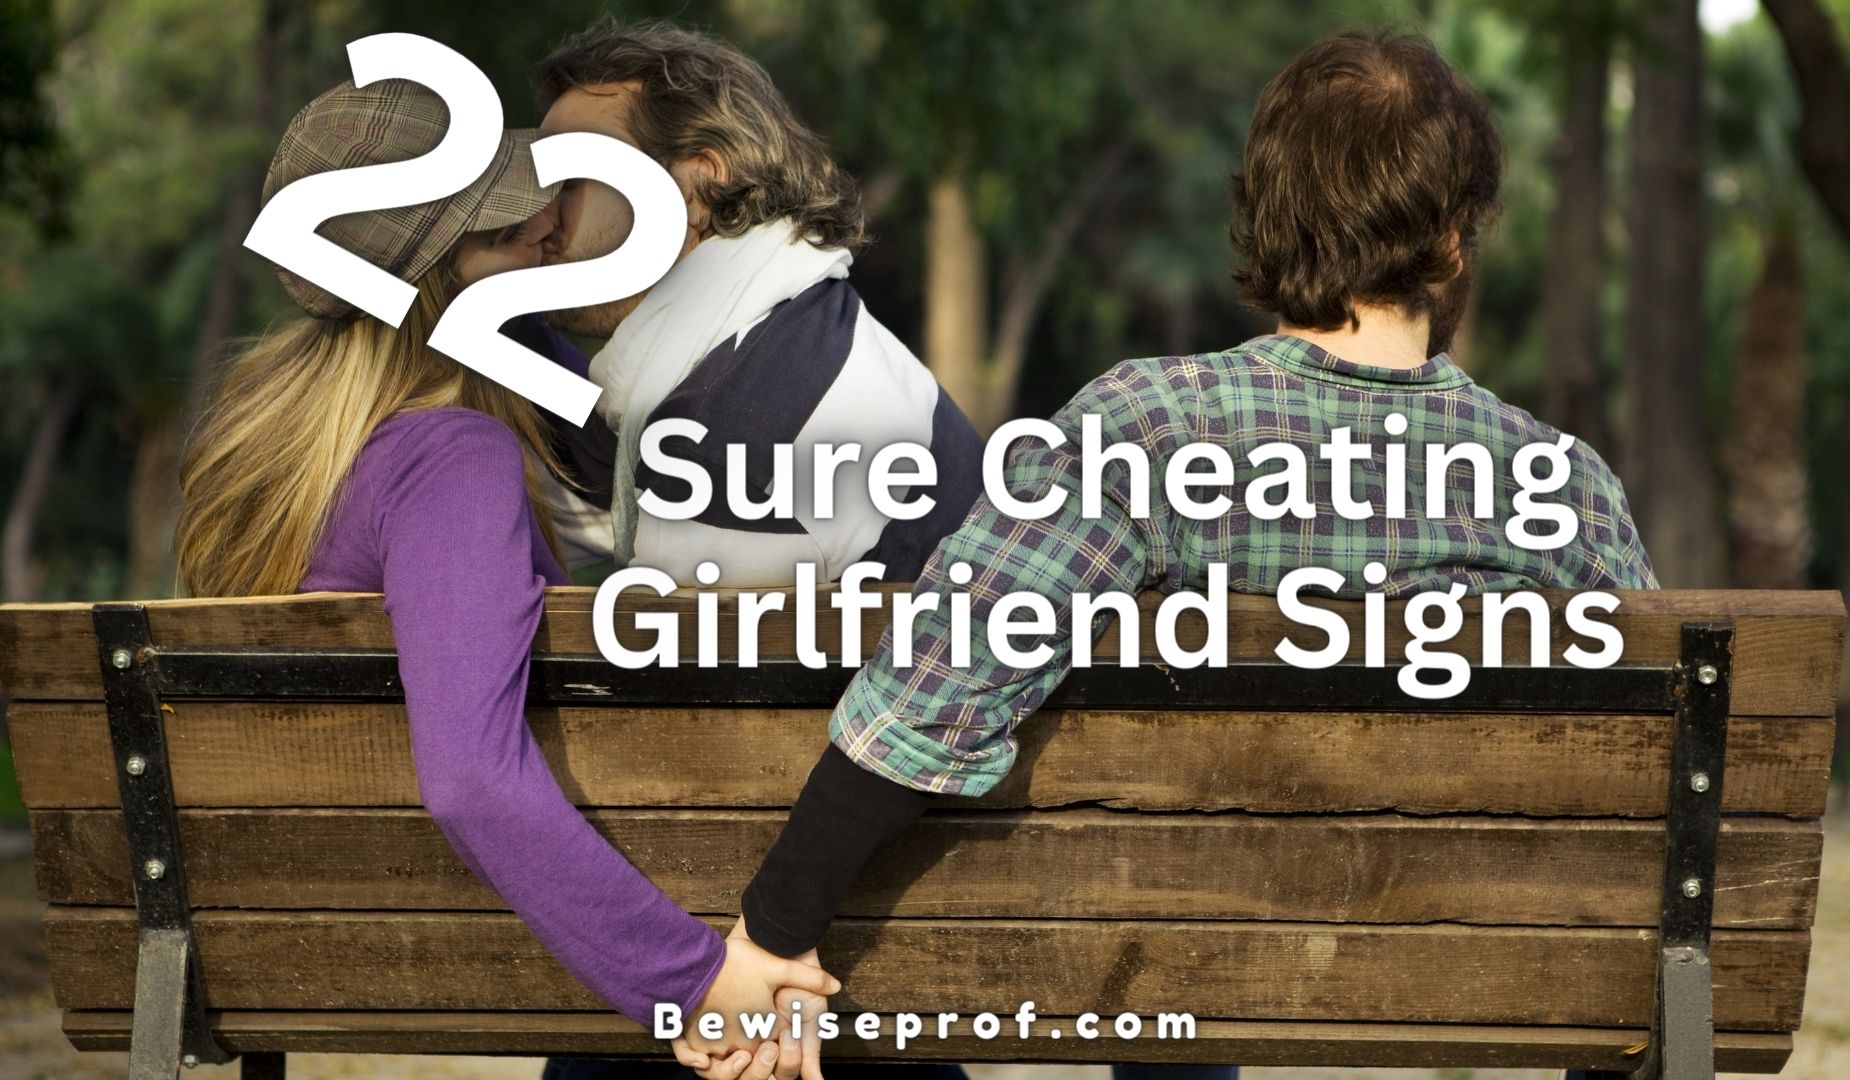 22 Sure Cheating Girlfriend Signs